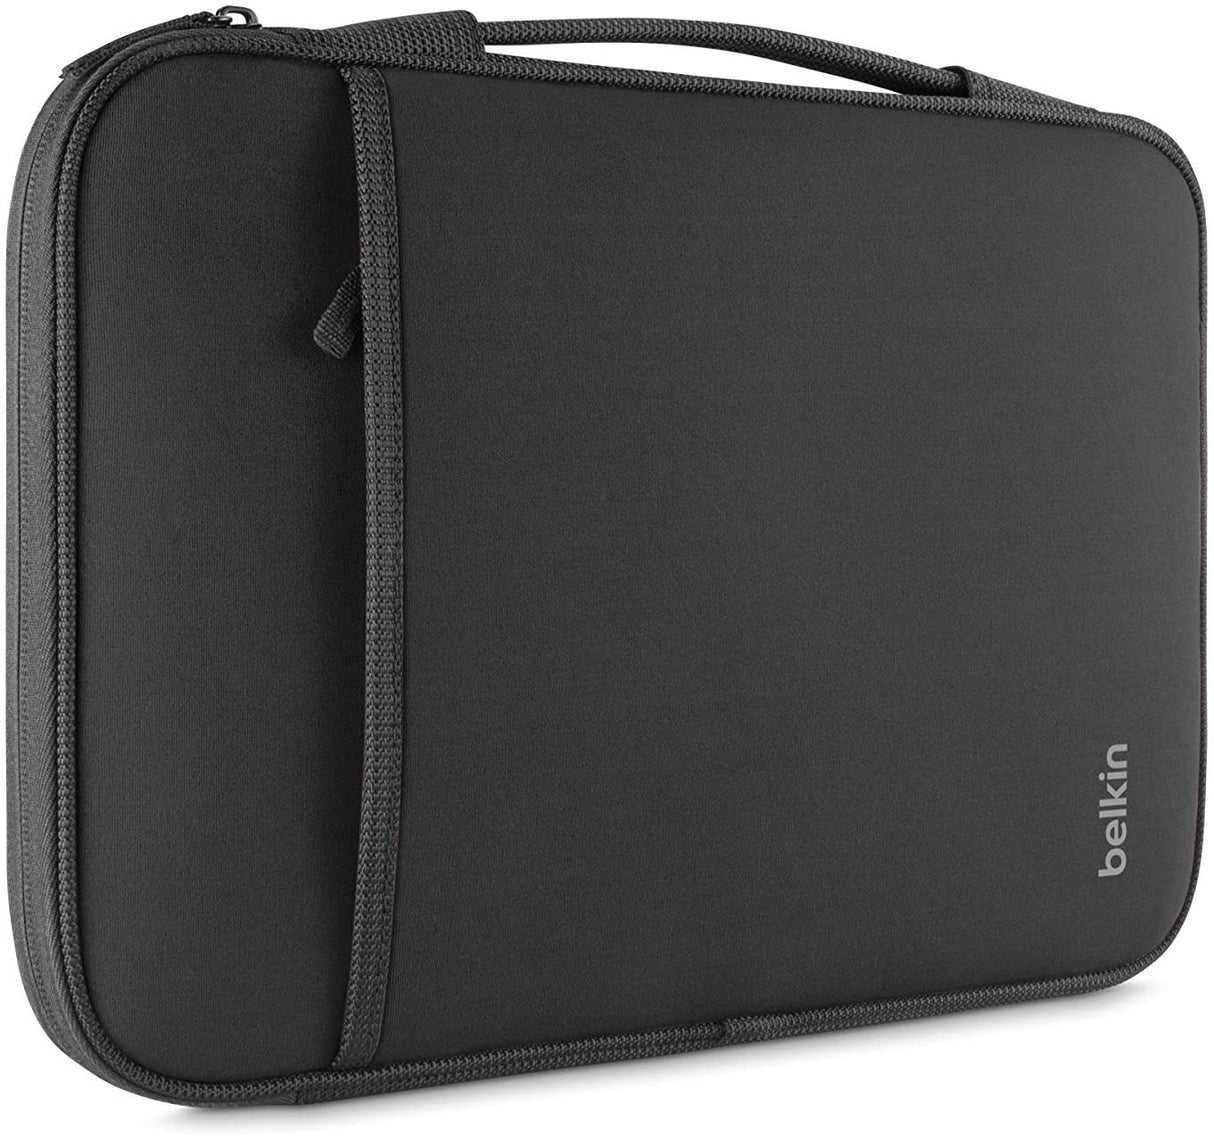 Belkin B2B064-C00 Sleeve(13 inch sleeve) for 12-Inch Laptops and Chromebook, Compatible with iPad Pro and Most 12-Inch Laptops / Notebooks (Black) Black 12 in